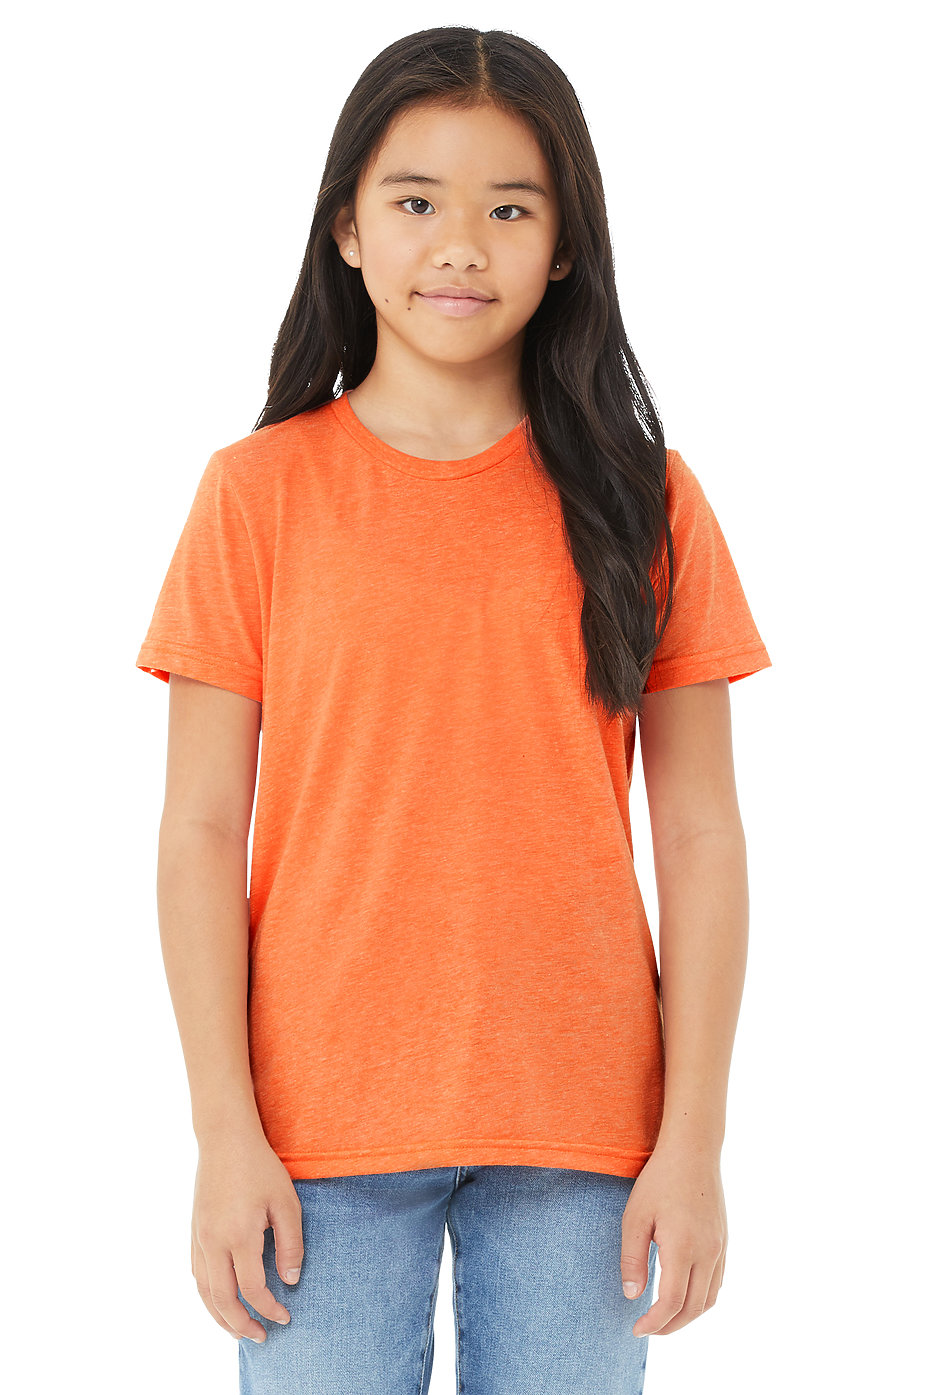 Wholesale Kids Clothes, Youth T Shirts